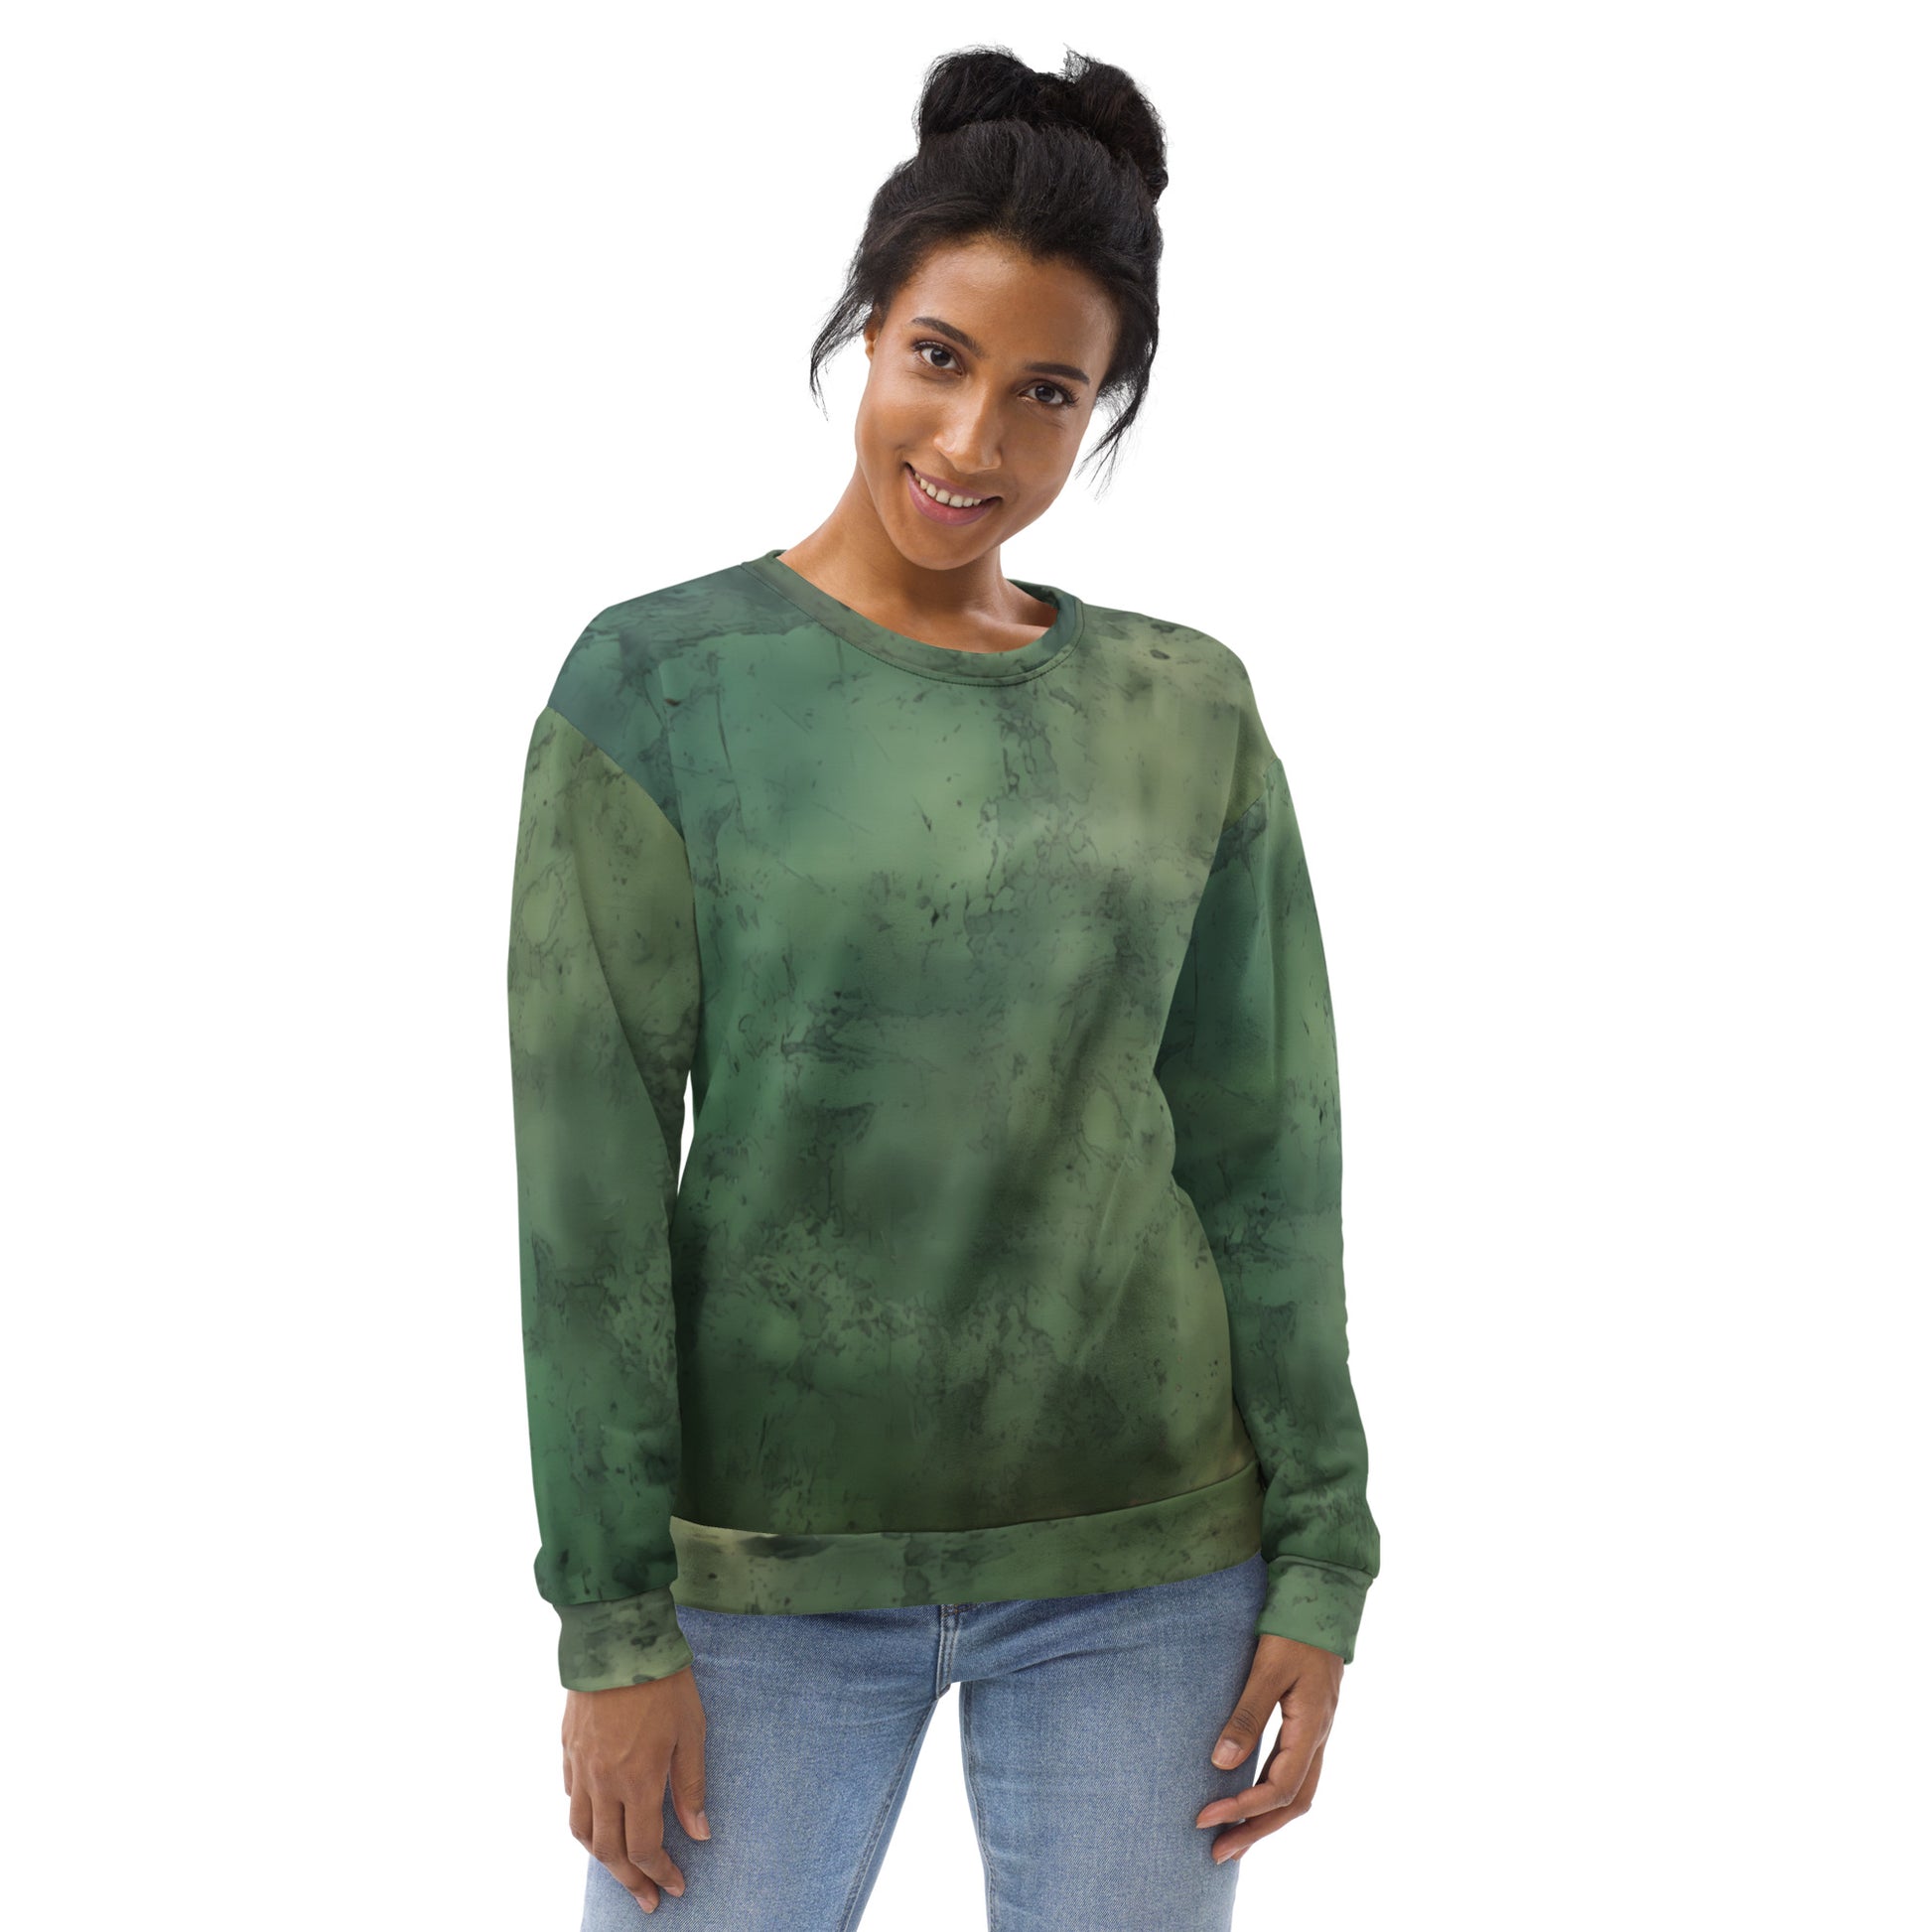 Earth-Embracing Unisex Sweater: Green Comfort for Men and Women